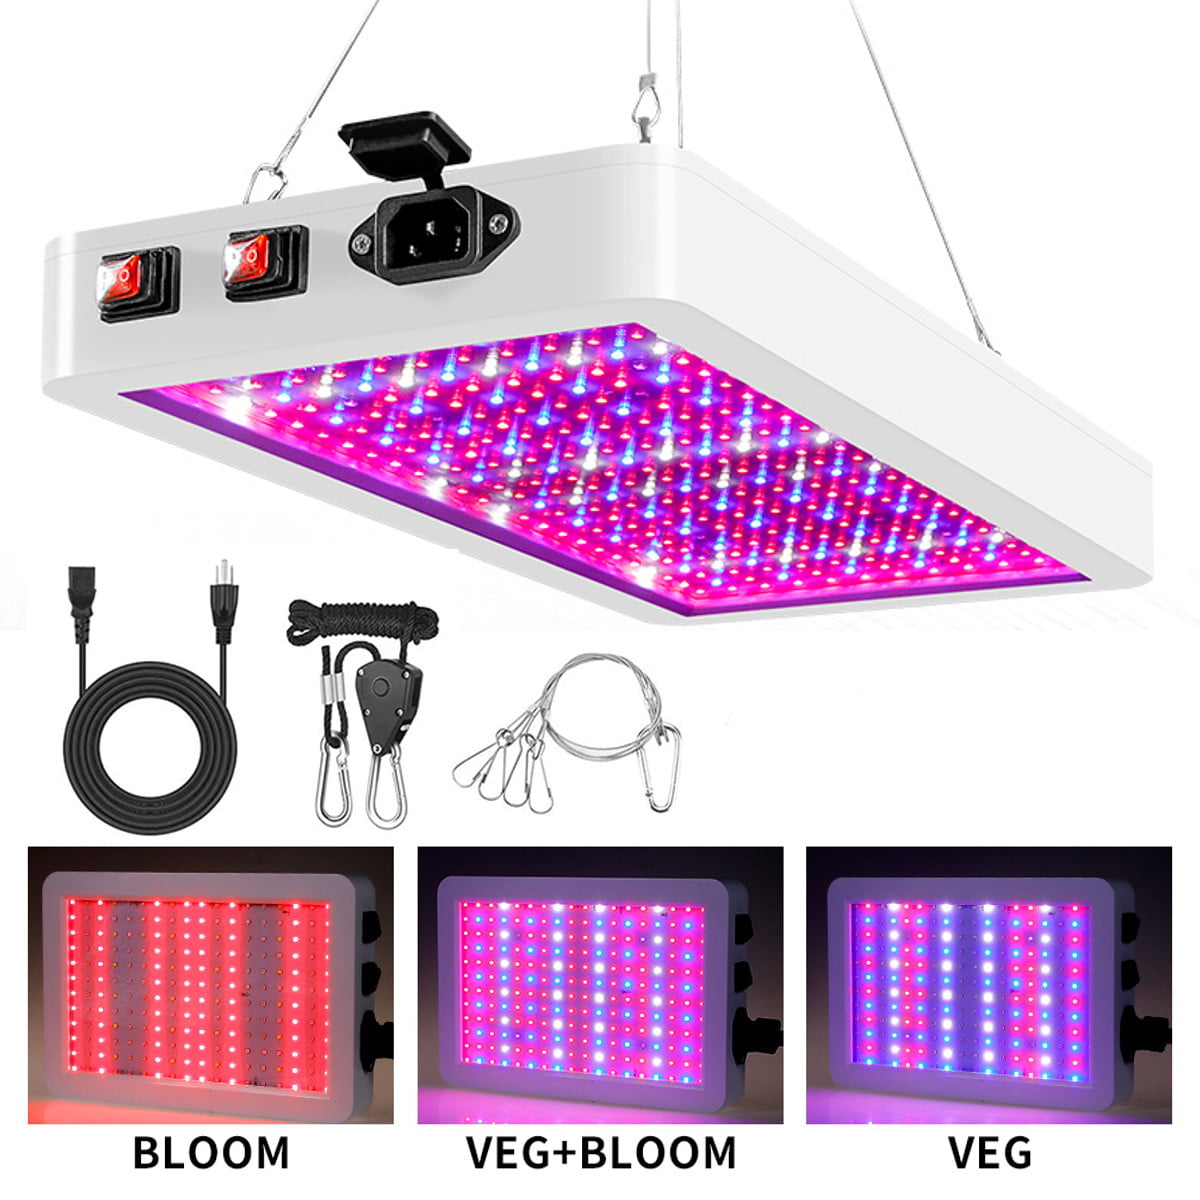 8000W LED Grow Lights Hydroponic Full Spectrum Indoor Plant Flower Growing Bloom 